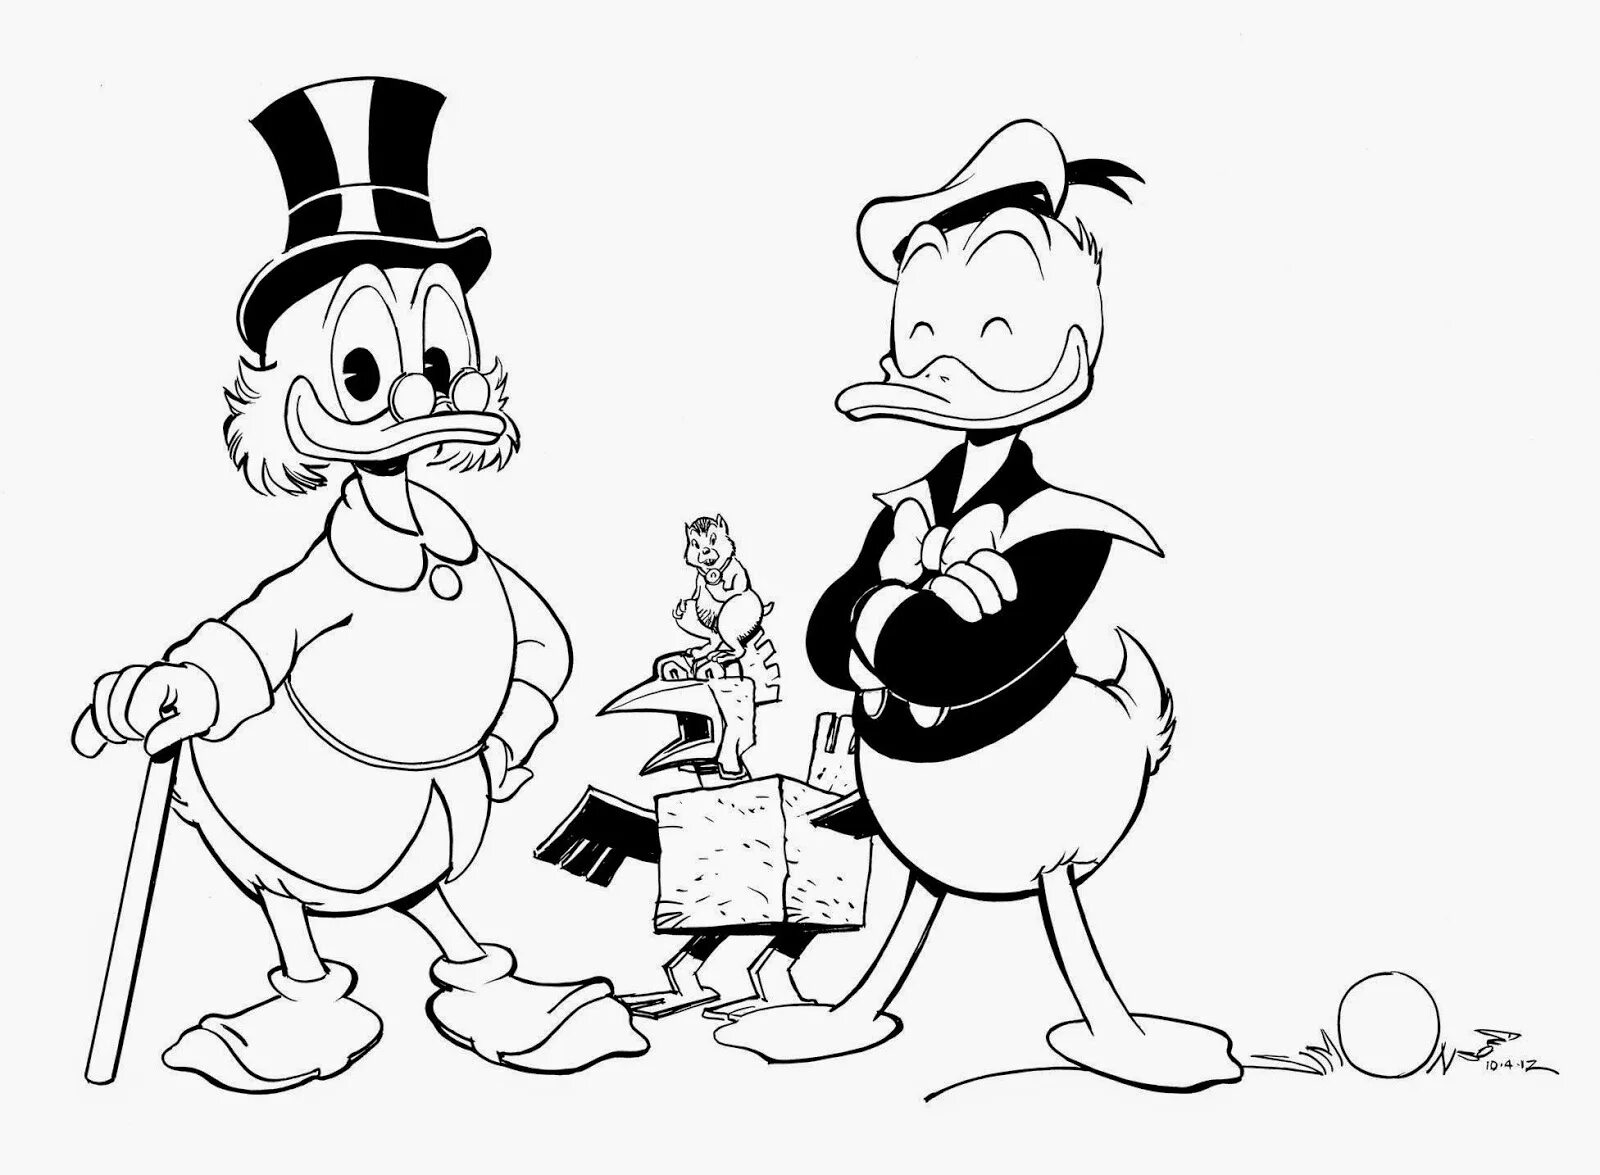 Coloring page rich scrooge mcduck with money